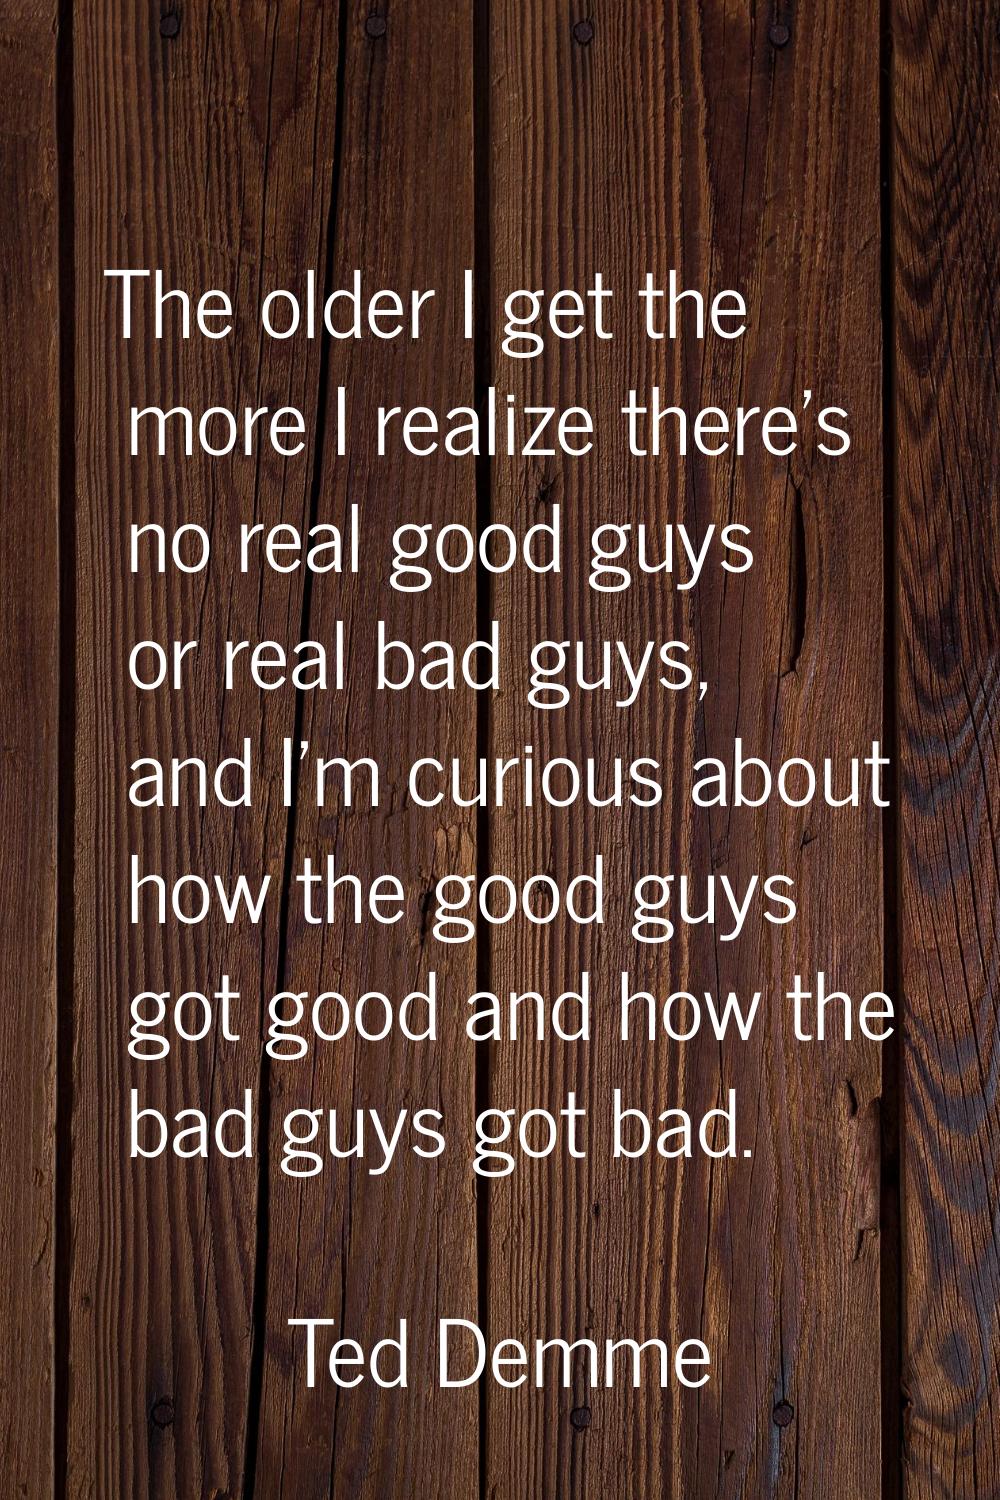 The older I get the more I realize there's no real good guys or real bad guys, and I'm curious abou